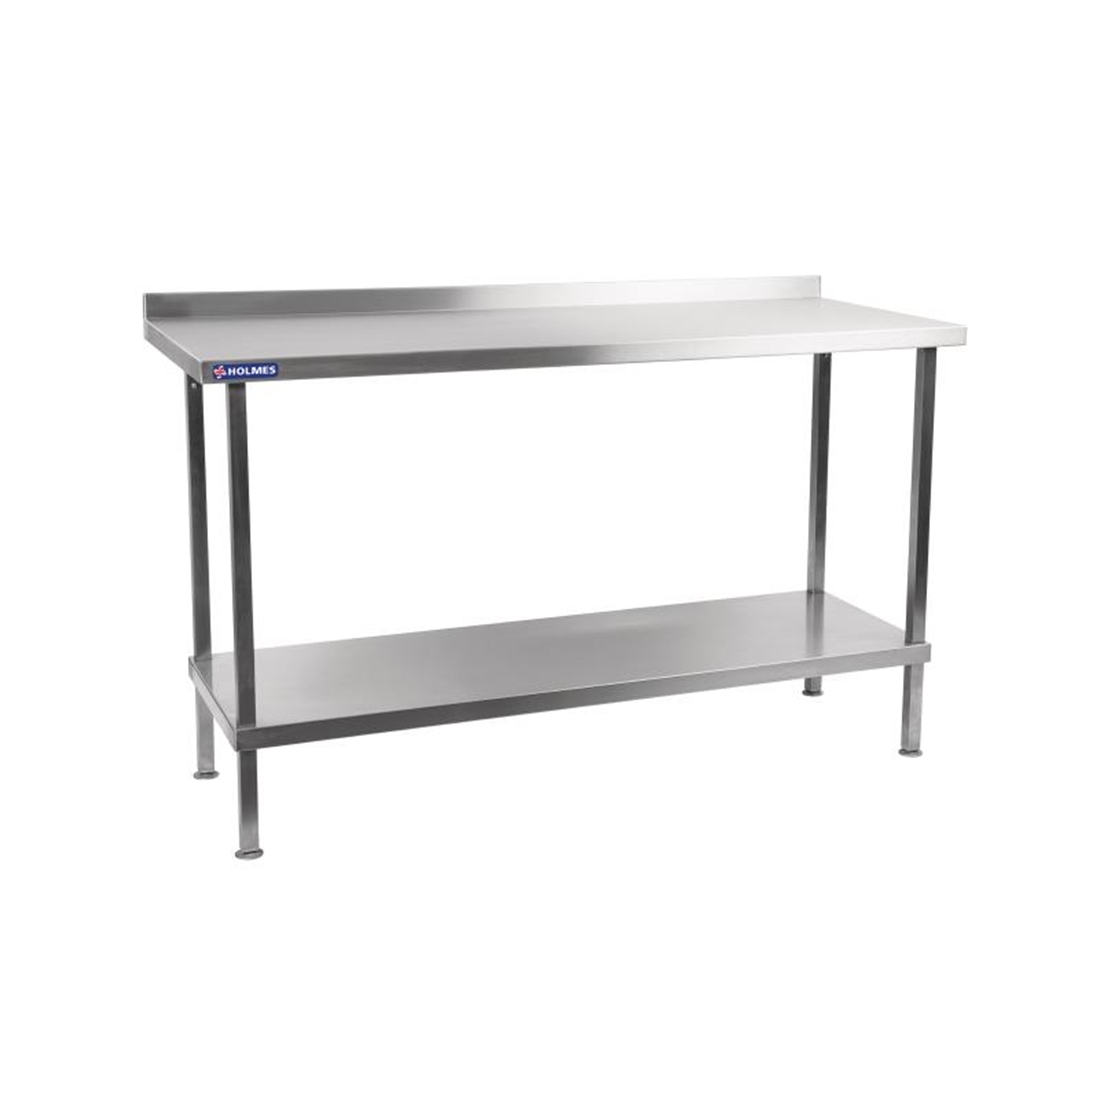 Holmes Stainless Steel Wall Table 1200mm